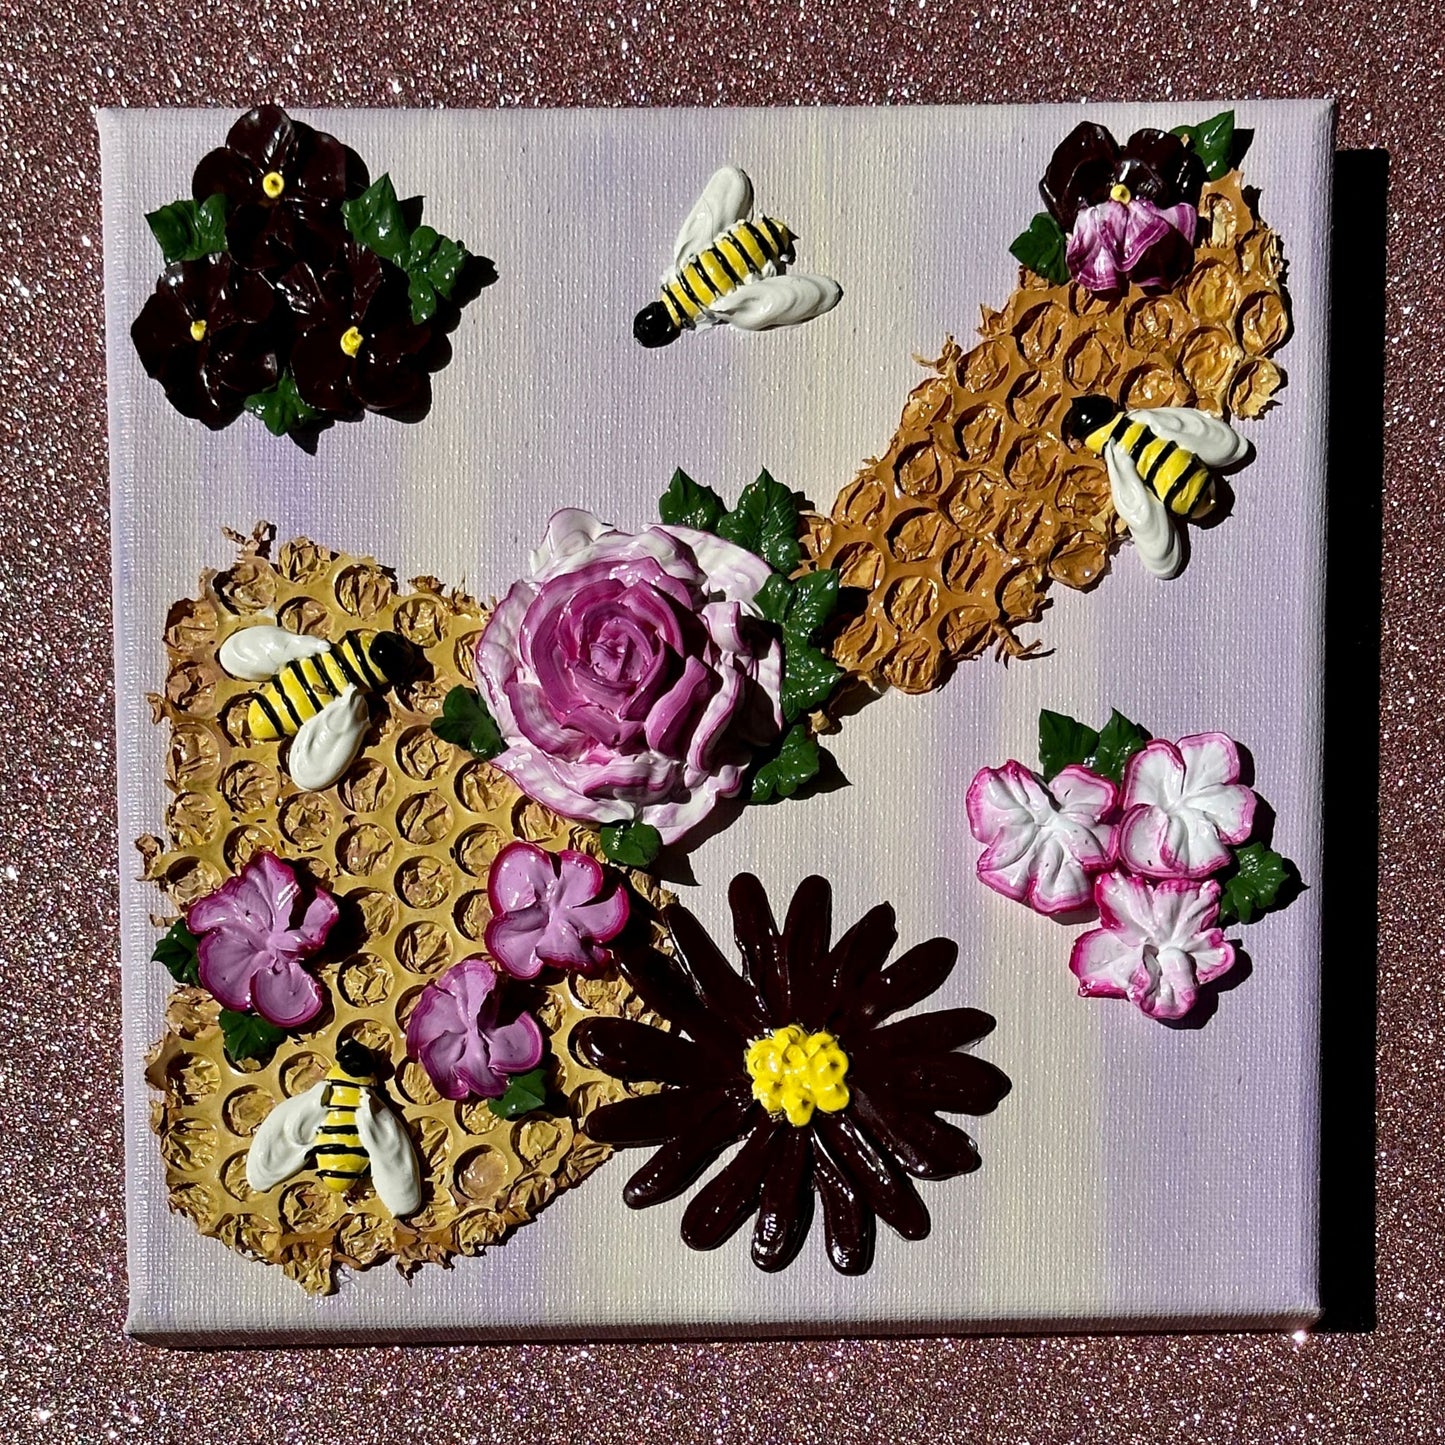 3D Bees and Purple Flowers on Purple Canvas 8"x8"